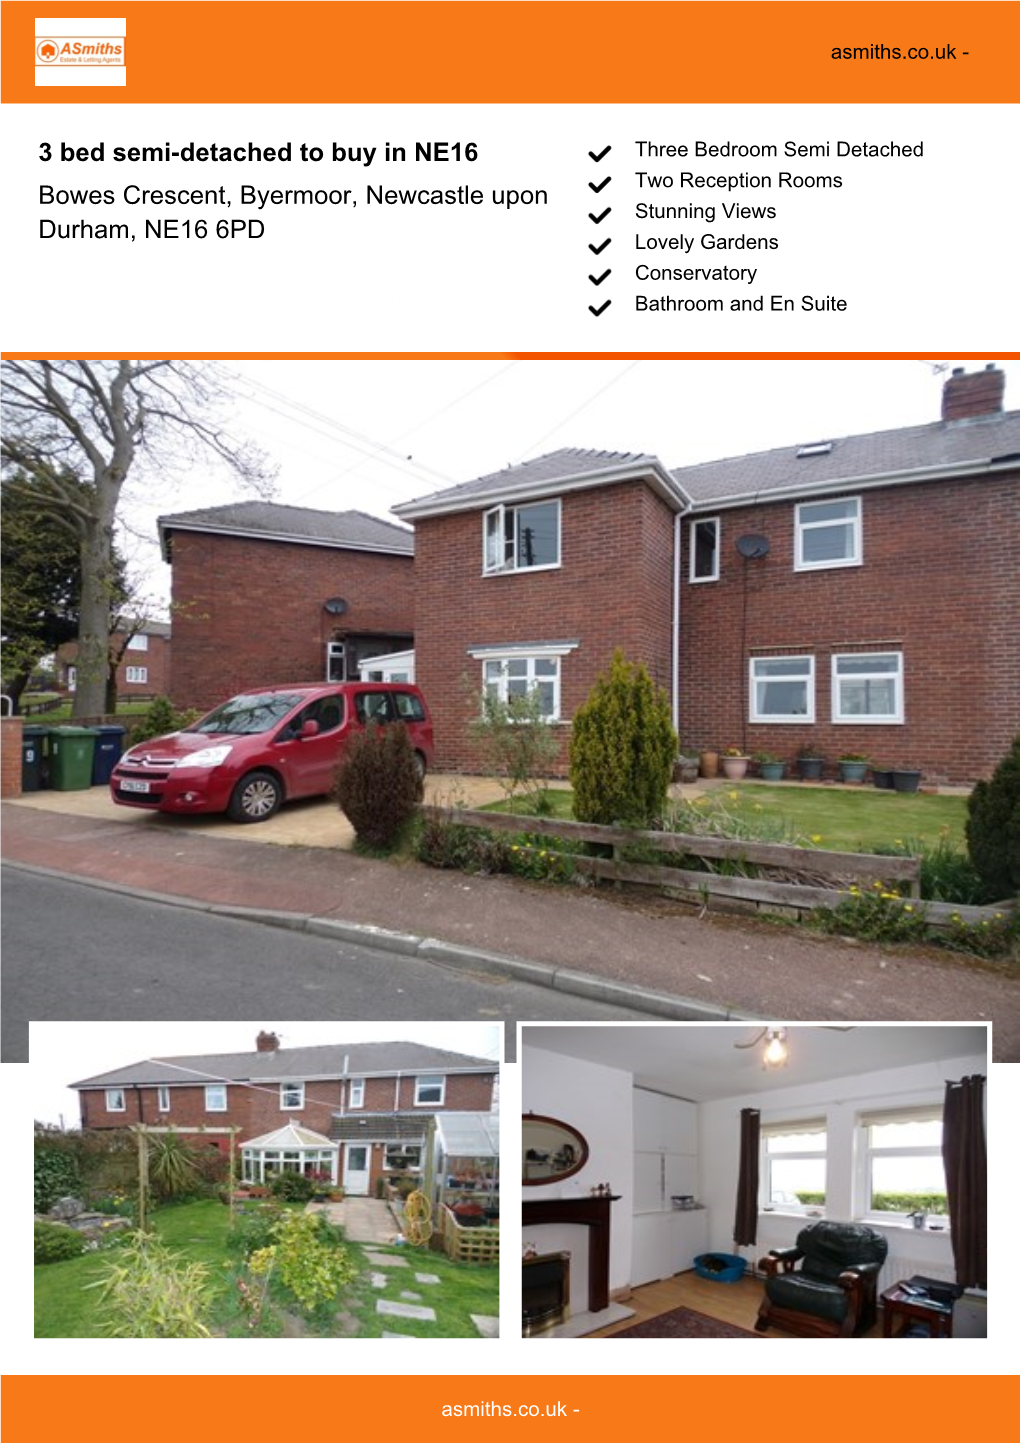 3 Bed Semi-Detached to Buy in NE16 Bowes Crescent, Byermoor, Newcastle Upon Durham, NE16 6PD £120,000 Offers Invited